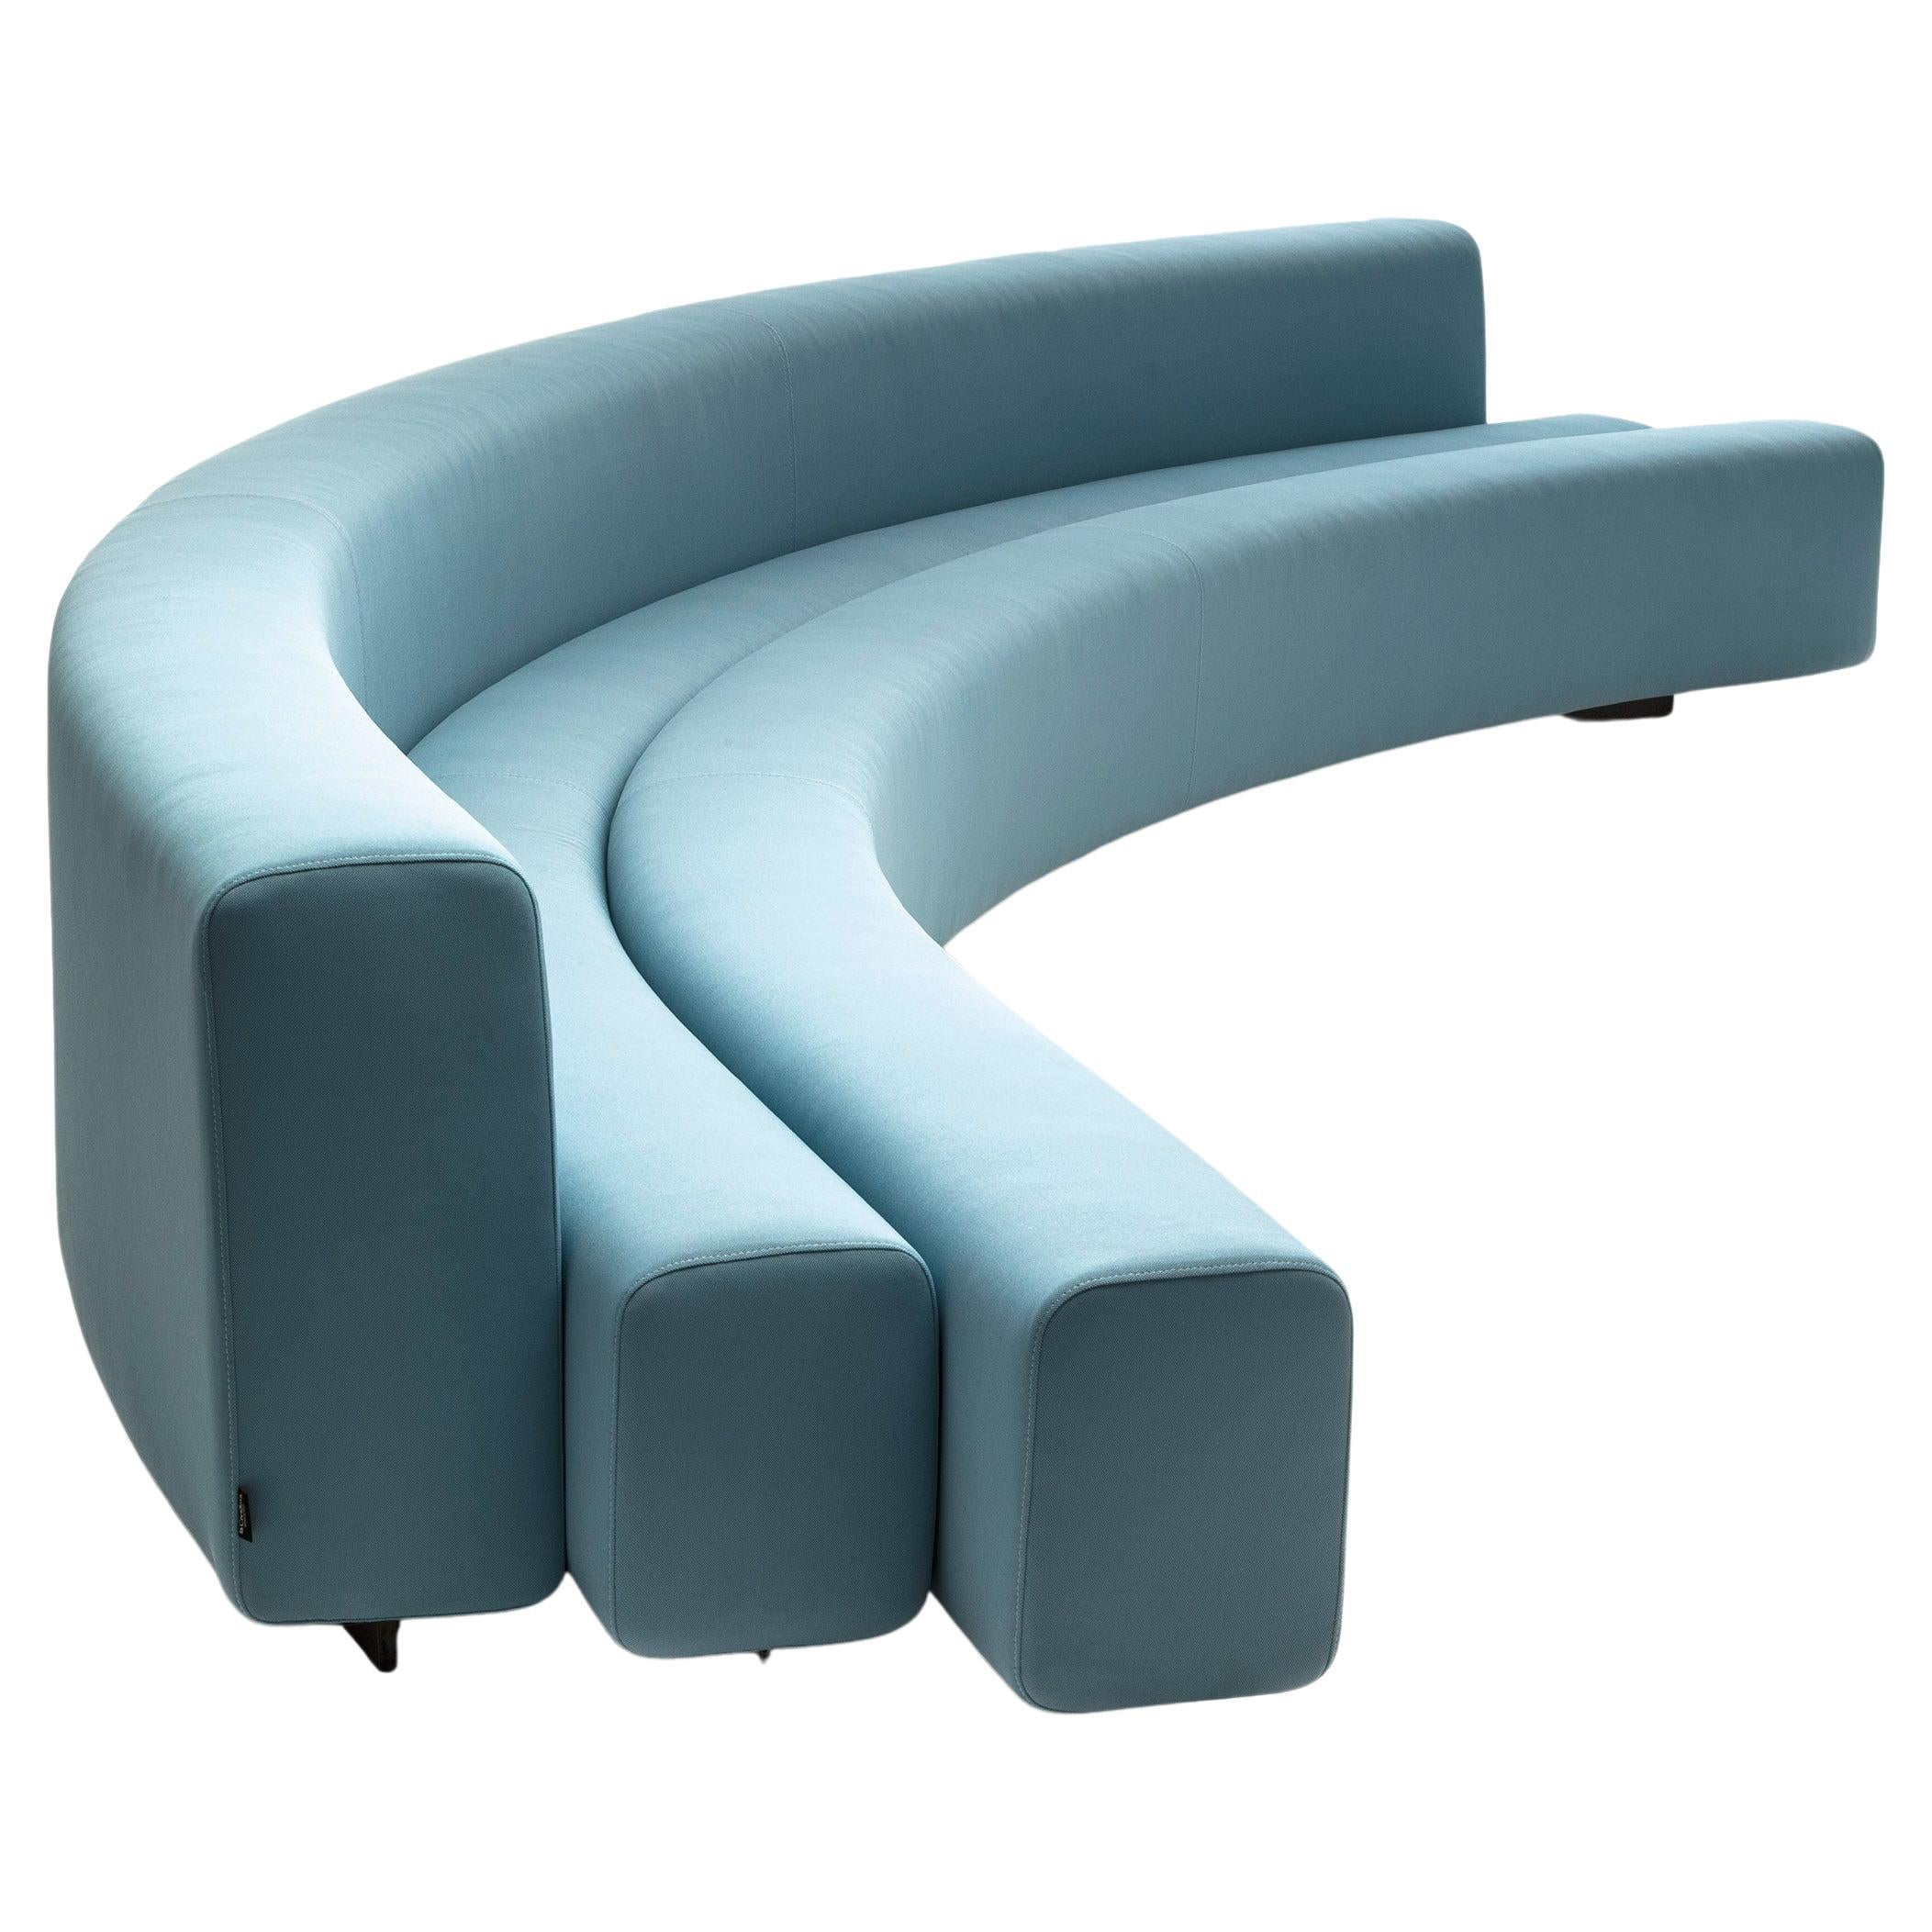 Osaka Medium Sofa in Stretchy Blue Upholstery by Pierre Paulin For Sale